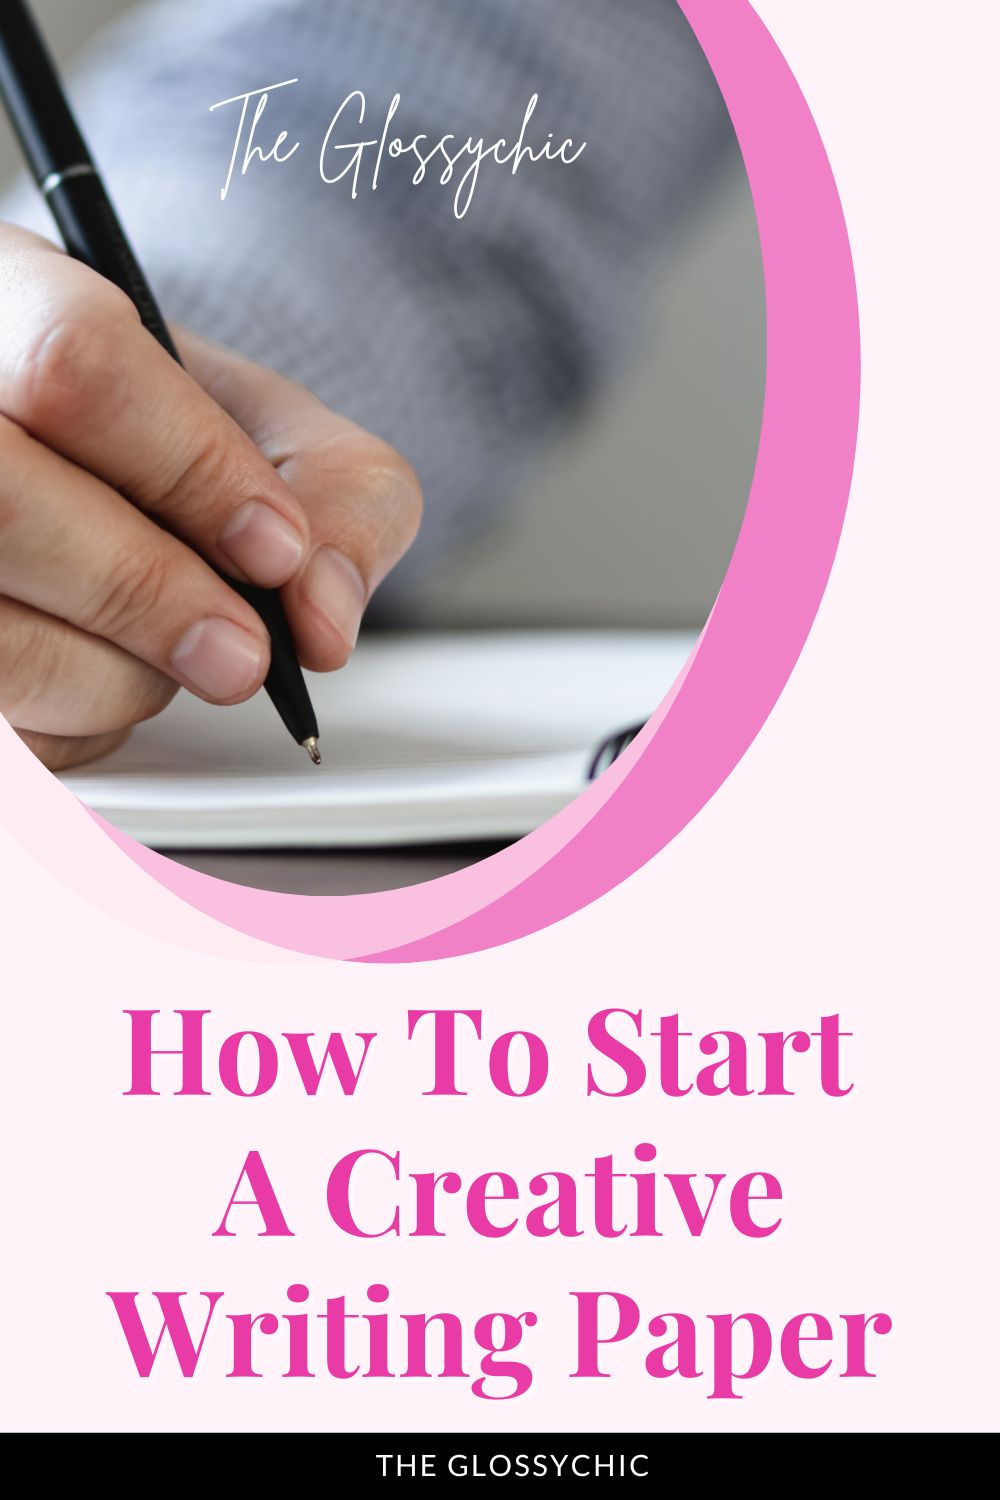 How to start a creative writing paper?